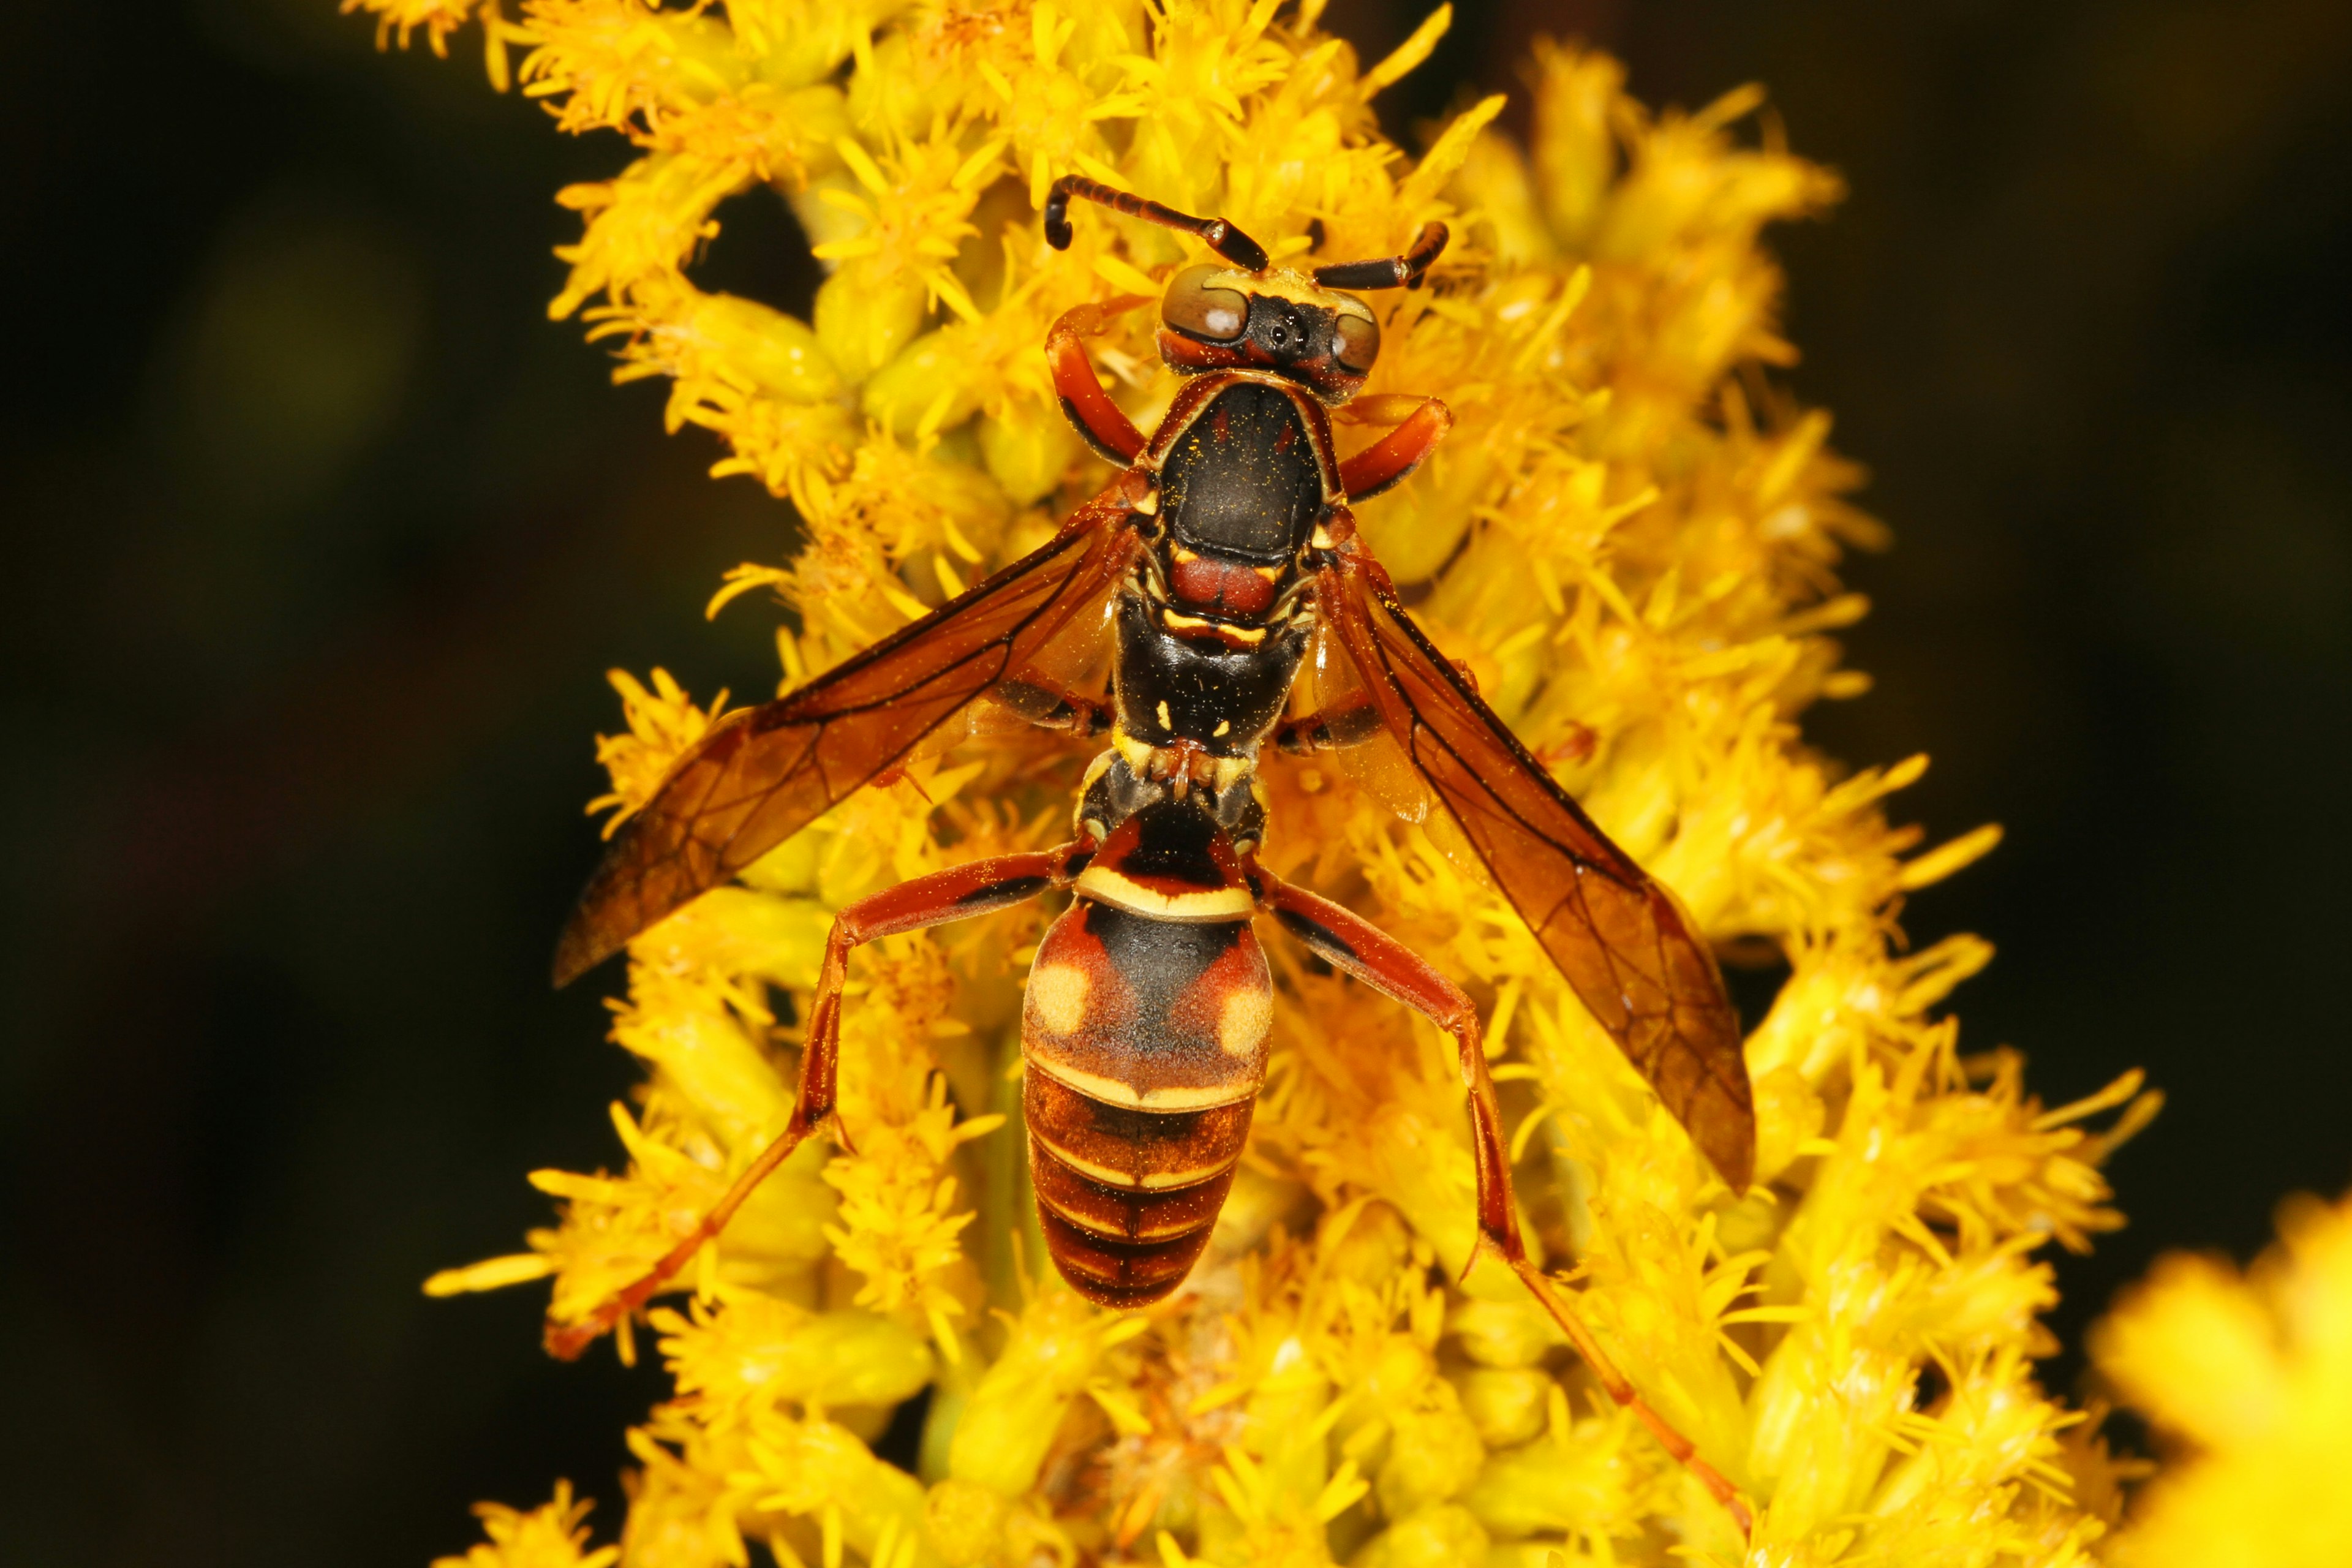 Polistes fuscatus from Virginia with brilliant red and yellow concentric abdominal spots